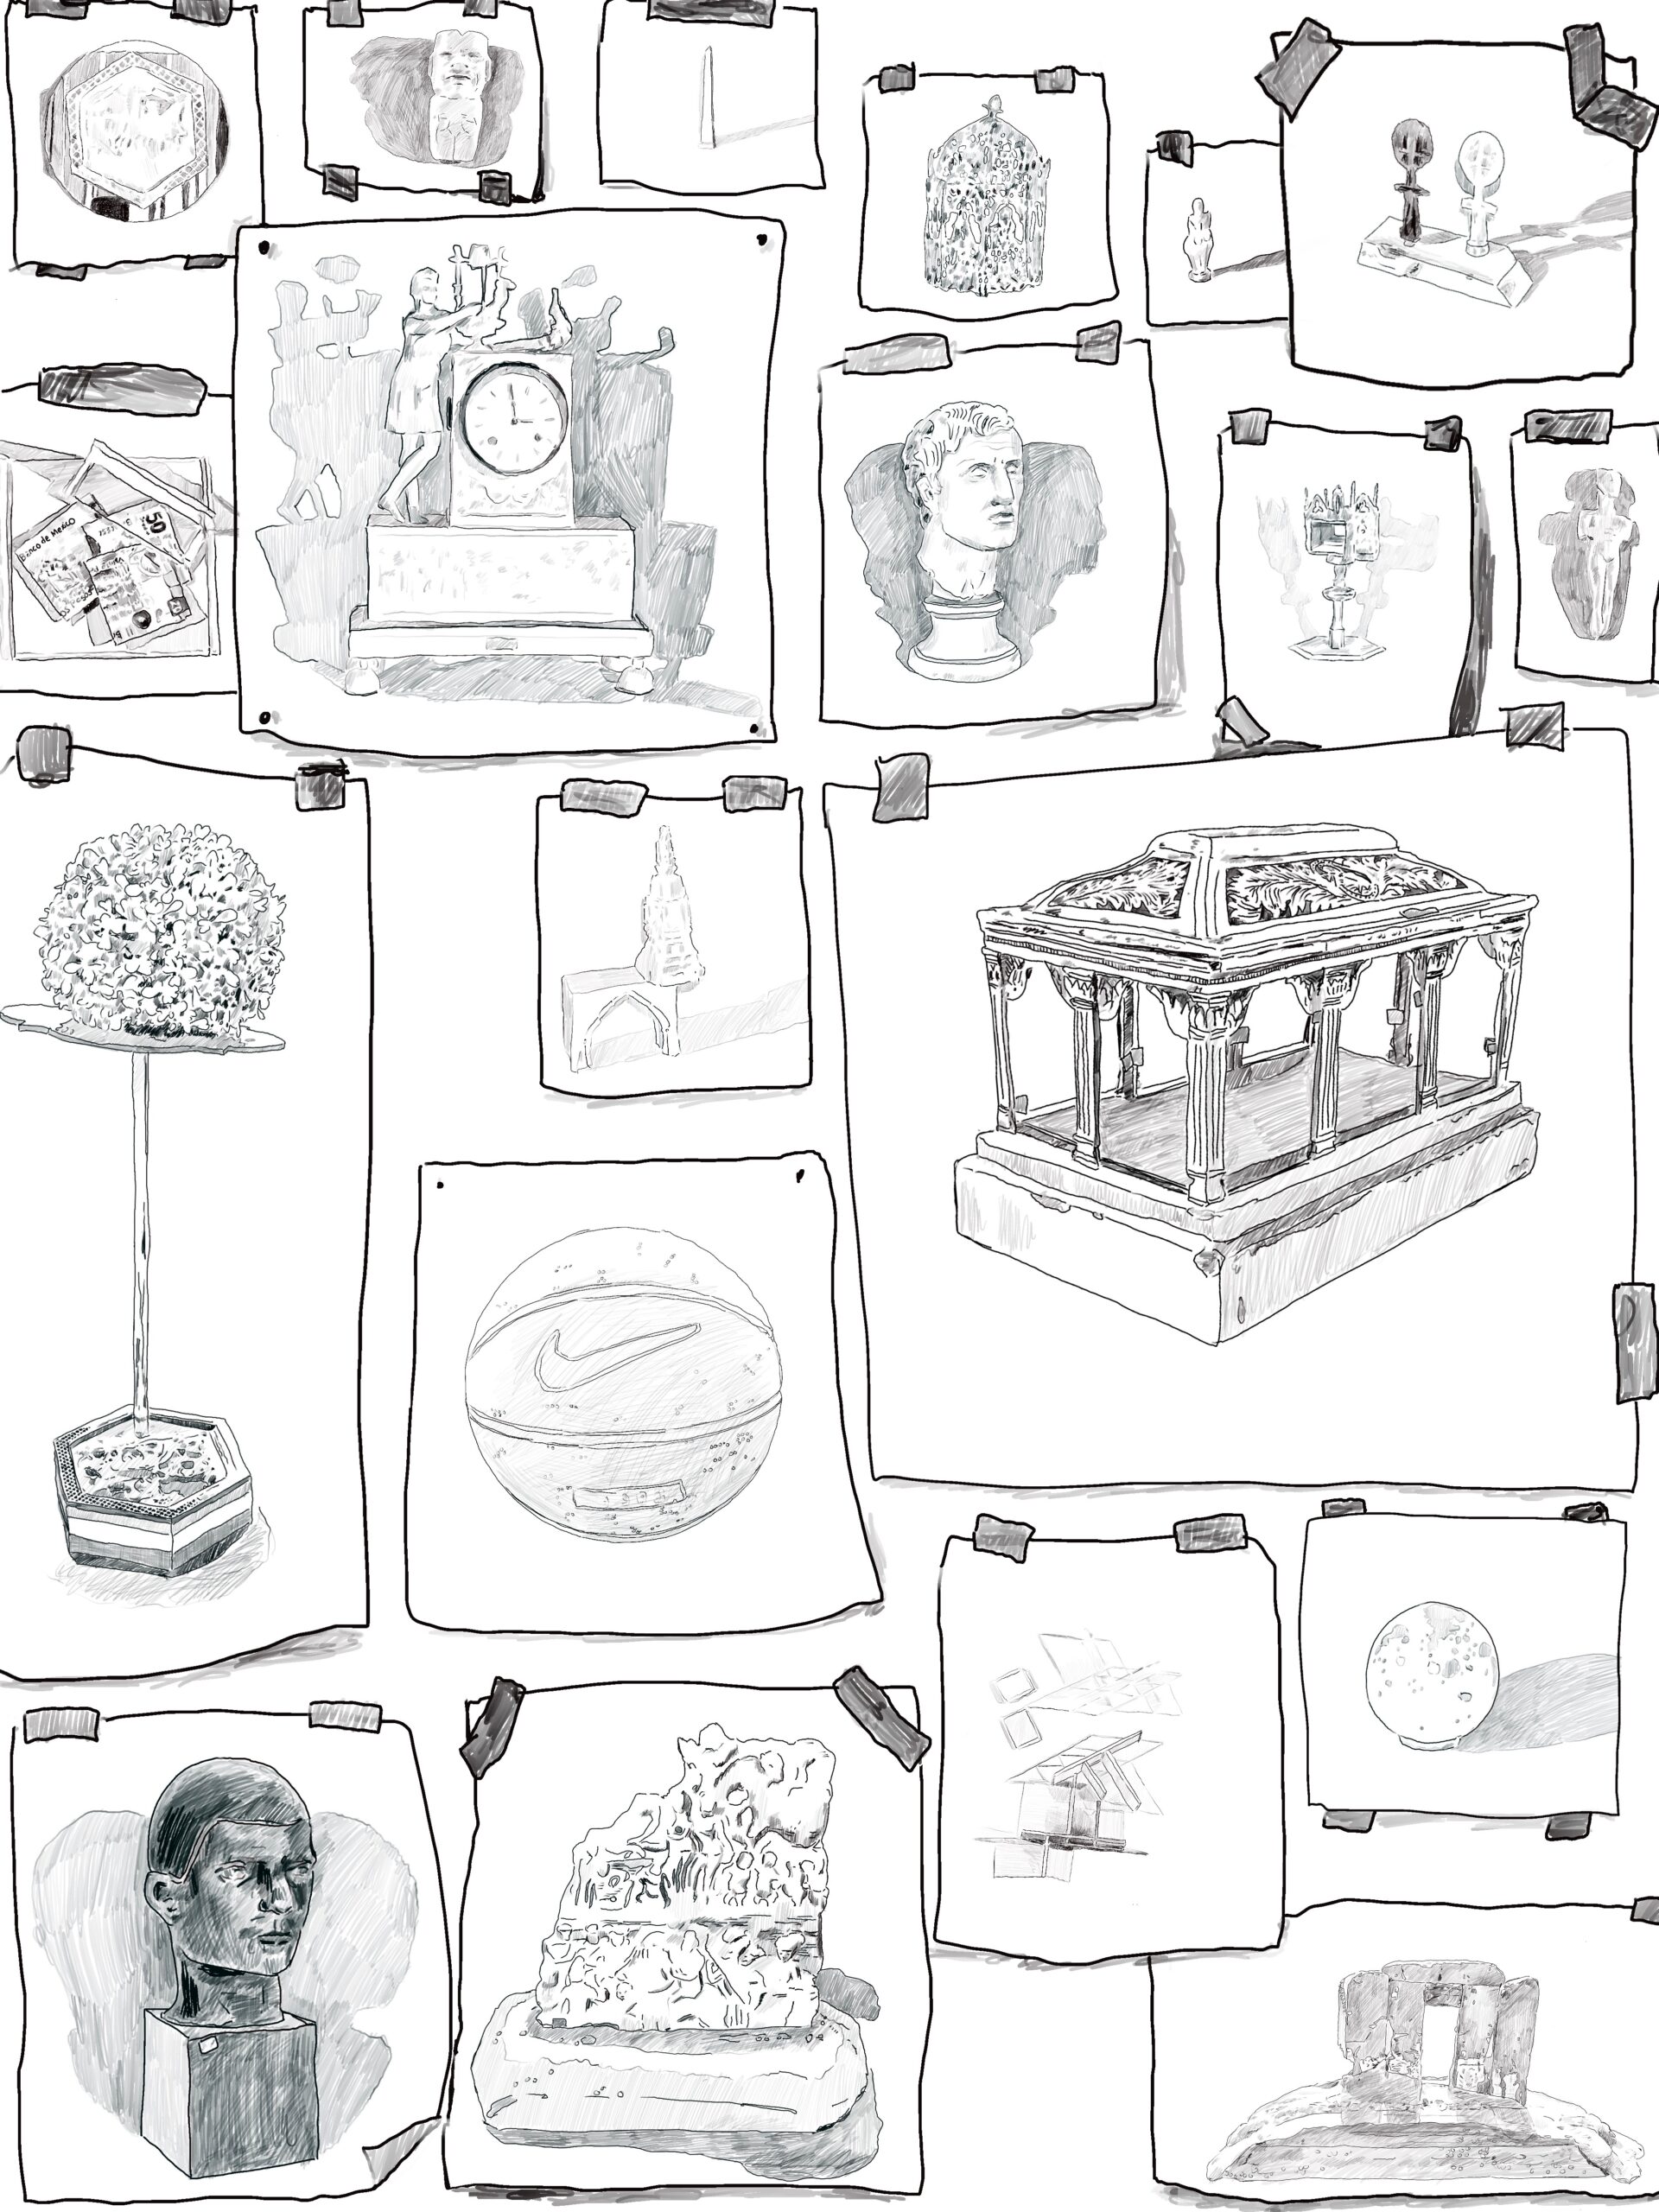 Black and white digital drawing of cultural objects made by artist Rob Andrade and objects in the PCG collection.